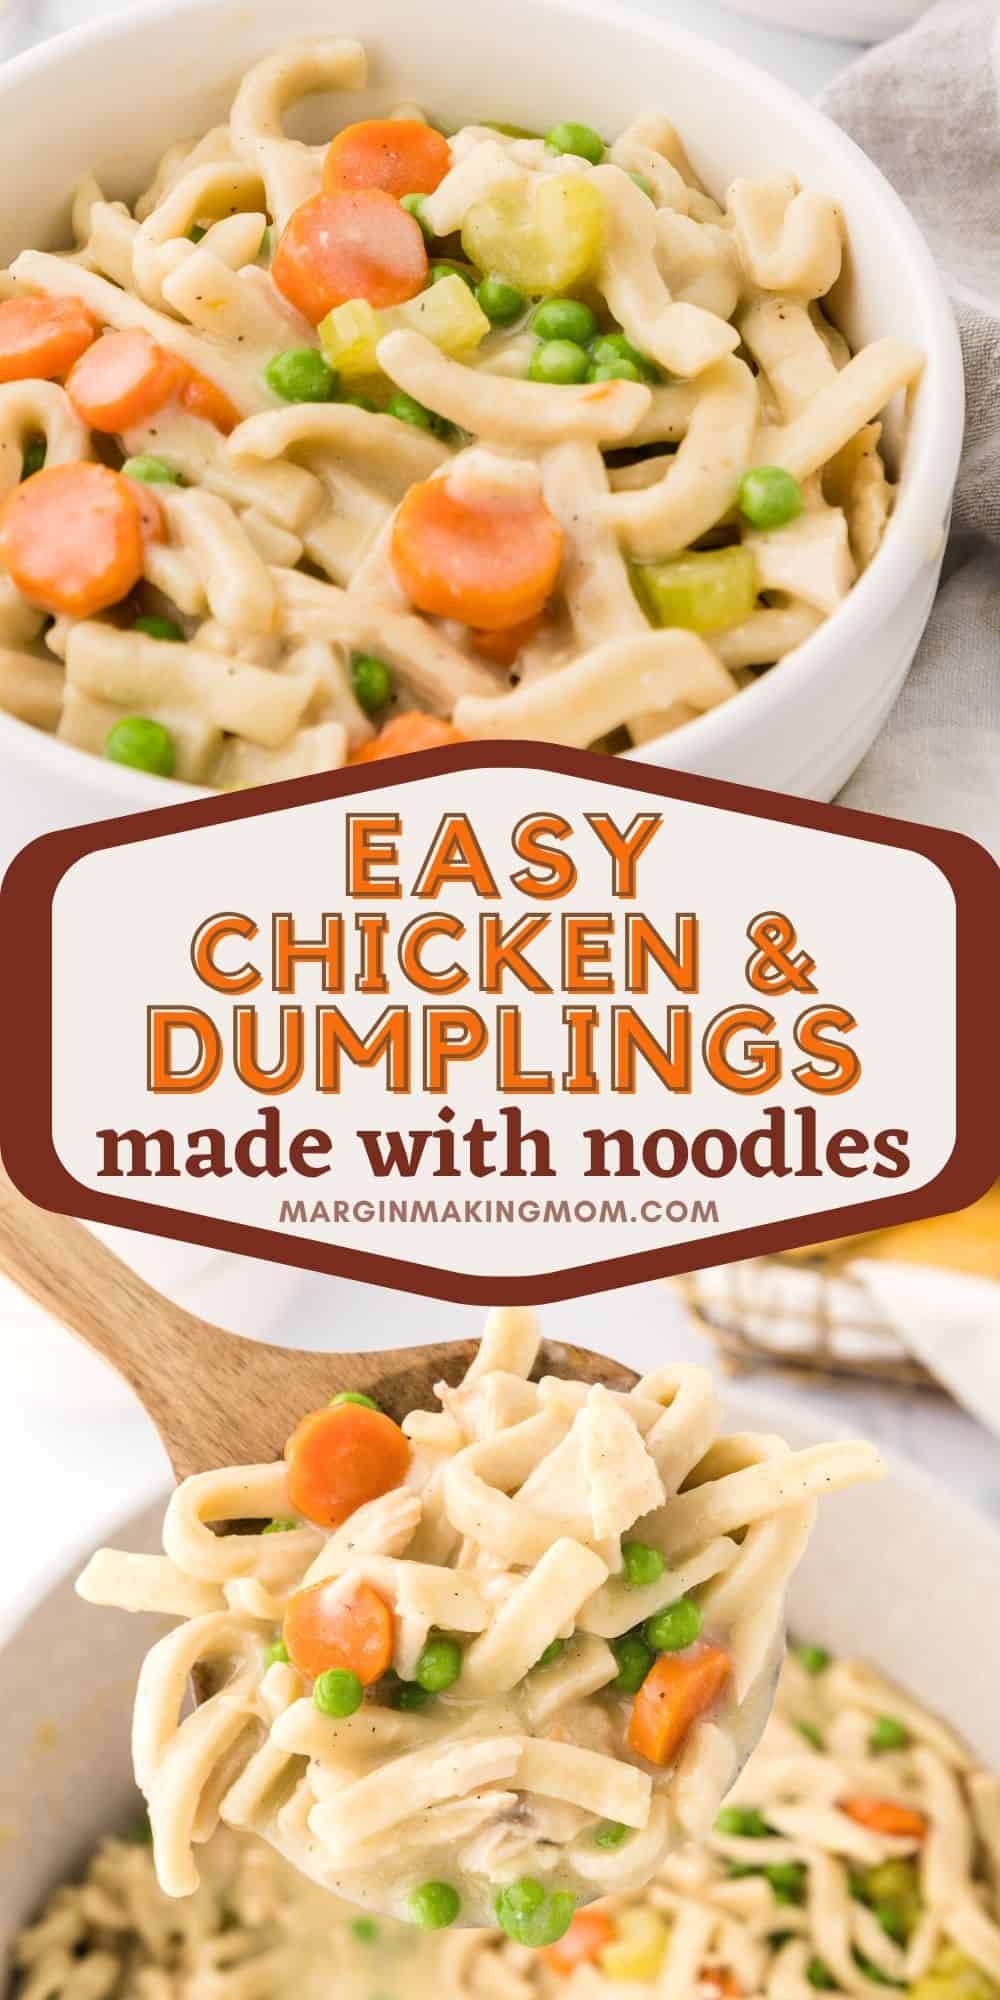 two photos; one shows a white bowl of chicken and noodle dumplings, the other shows a wooden spoon scooping out chicken and dumplings made with noodles from a dutch oven